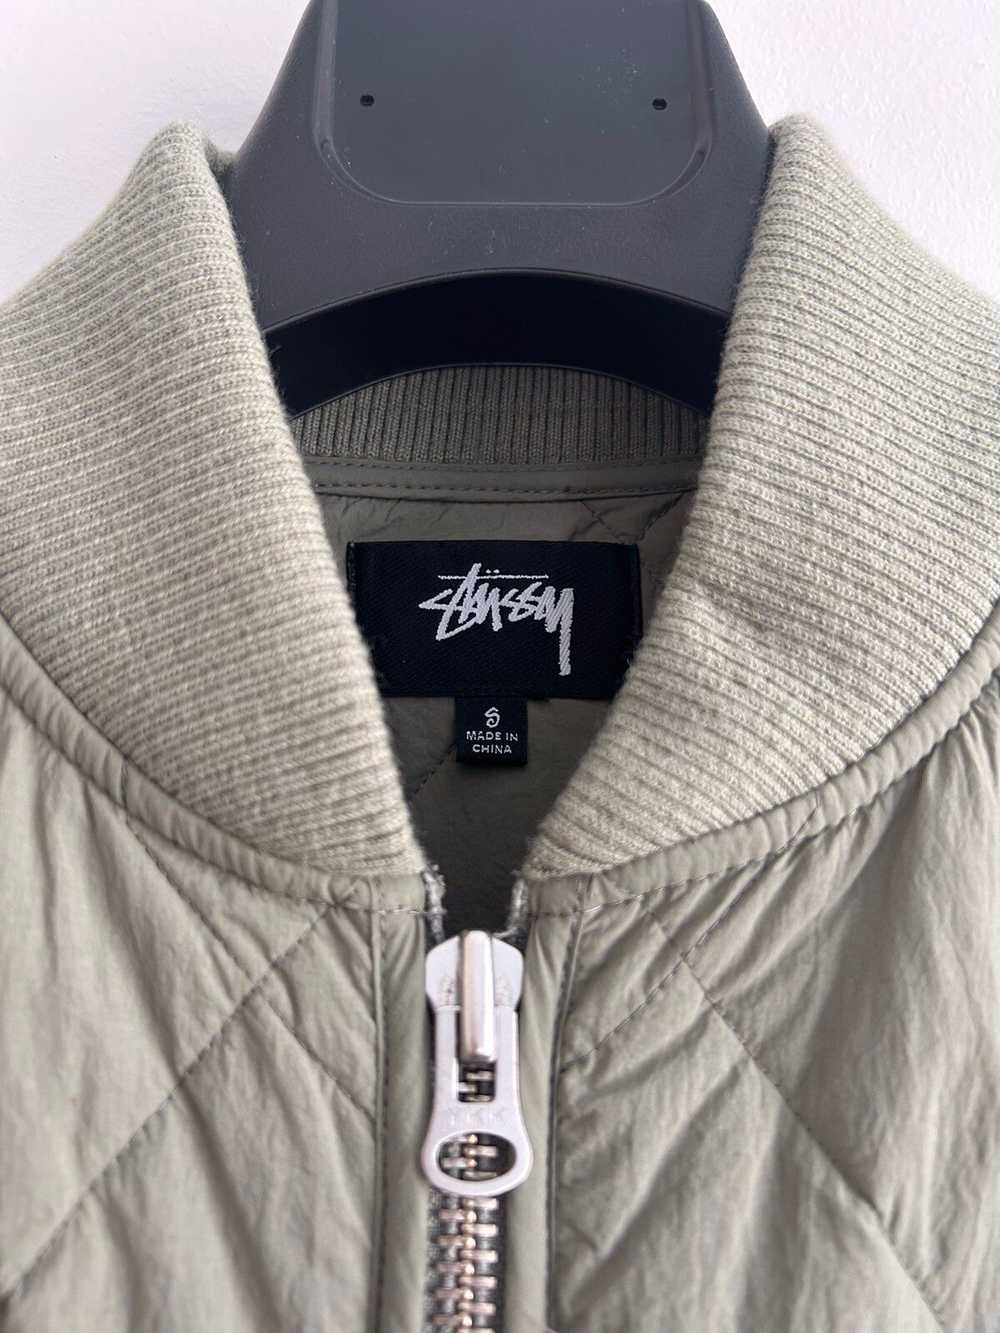 Stussy Stussy quilted jacket with dice patches 🎲 - image 3